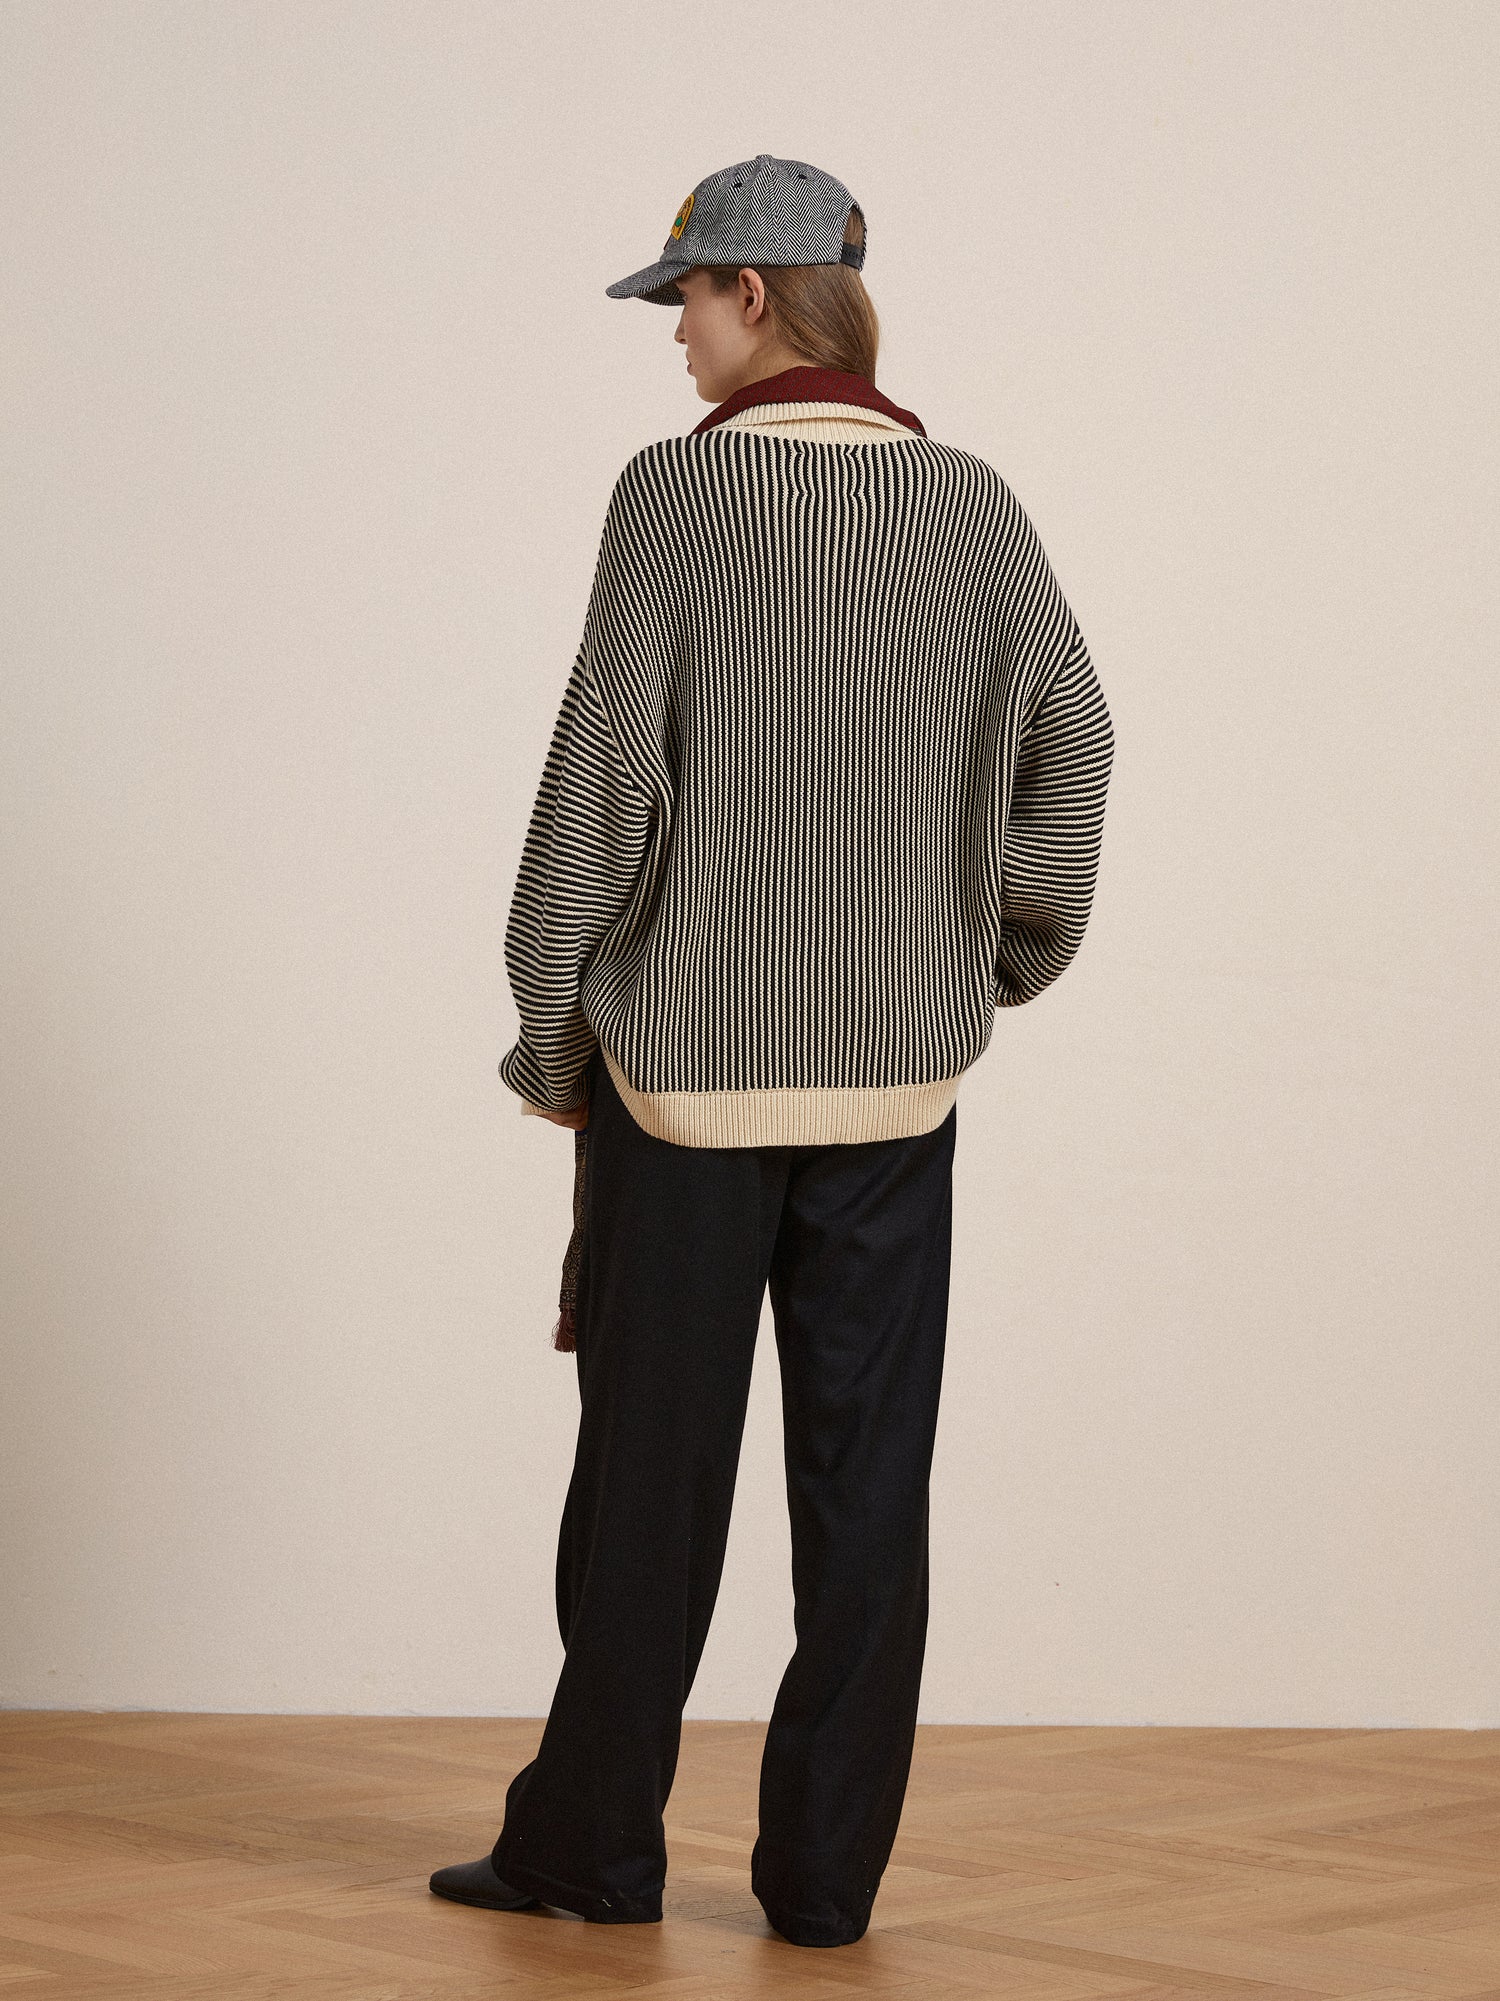 The back view of a woman wearing a grey Found Tabas Tie Knit Collared Sweater with intricate knit patterns and black pants.